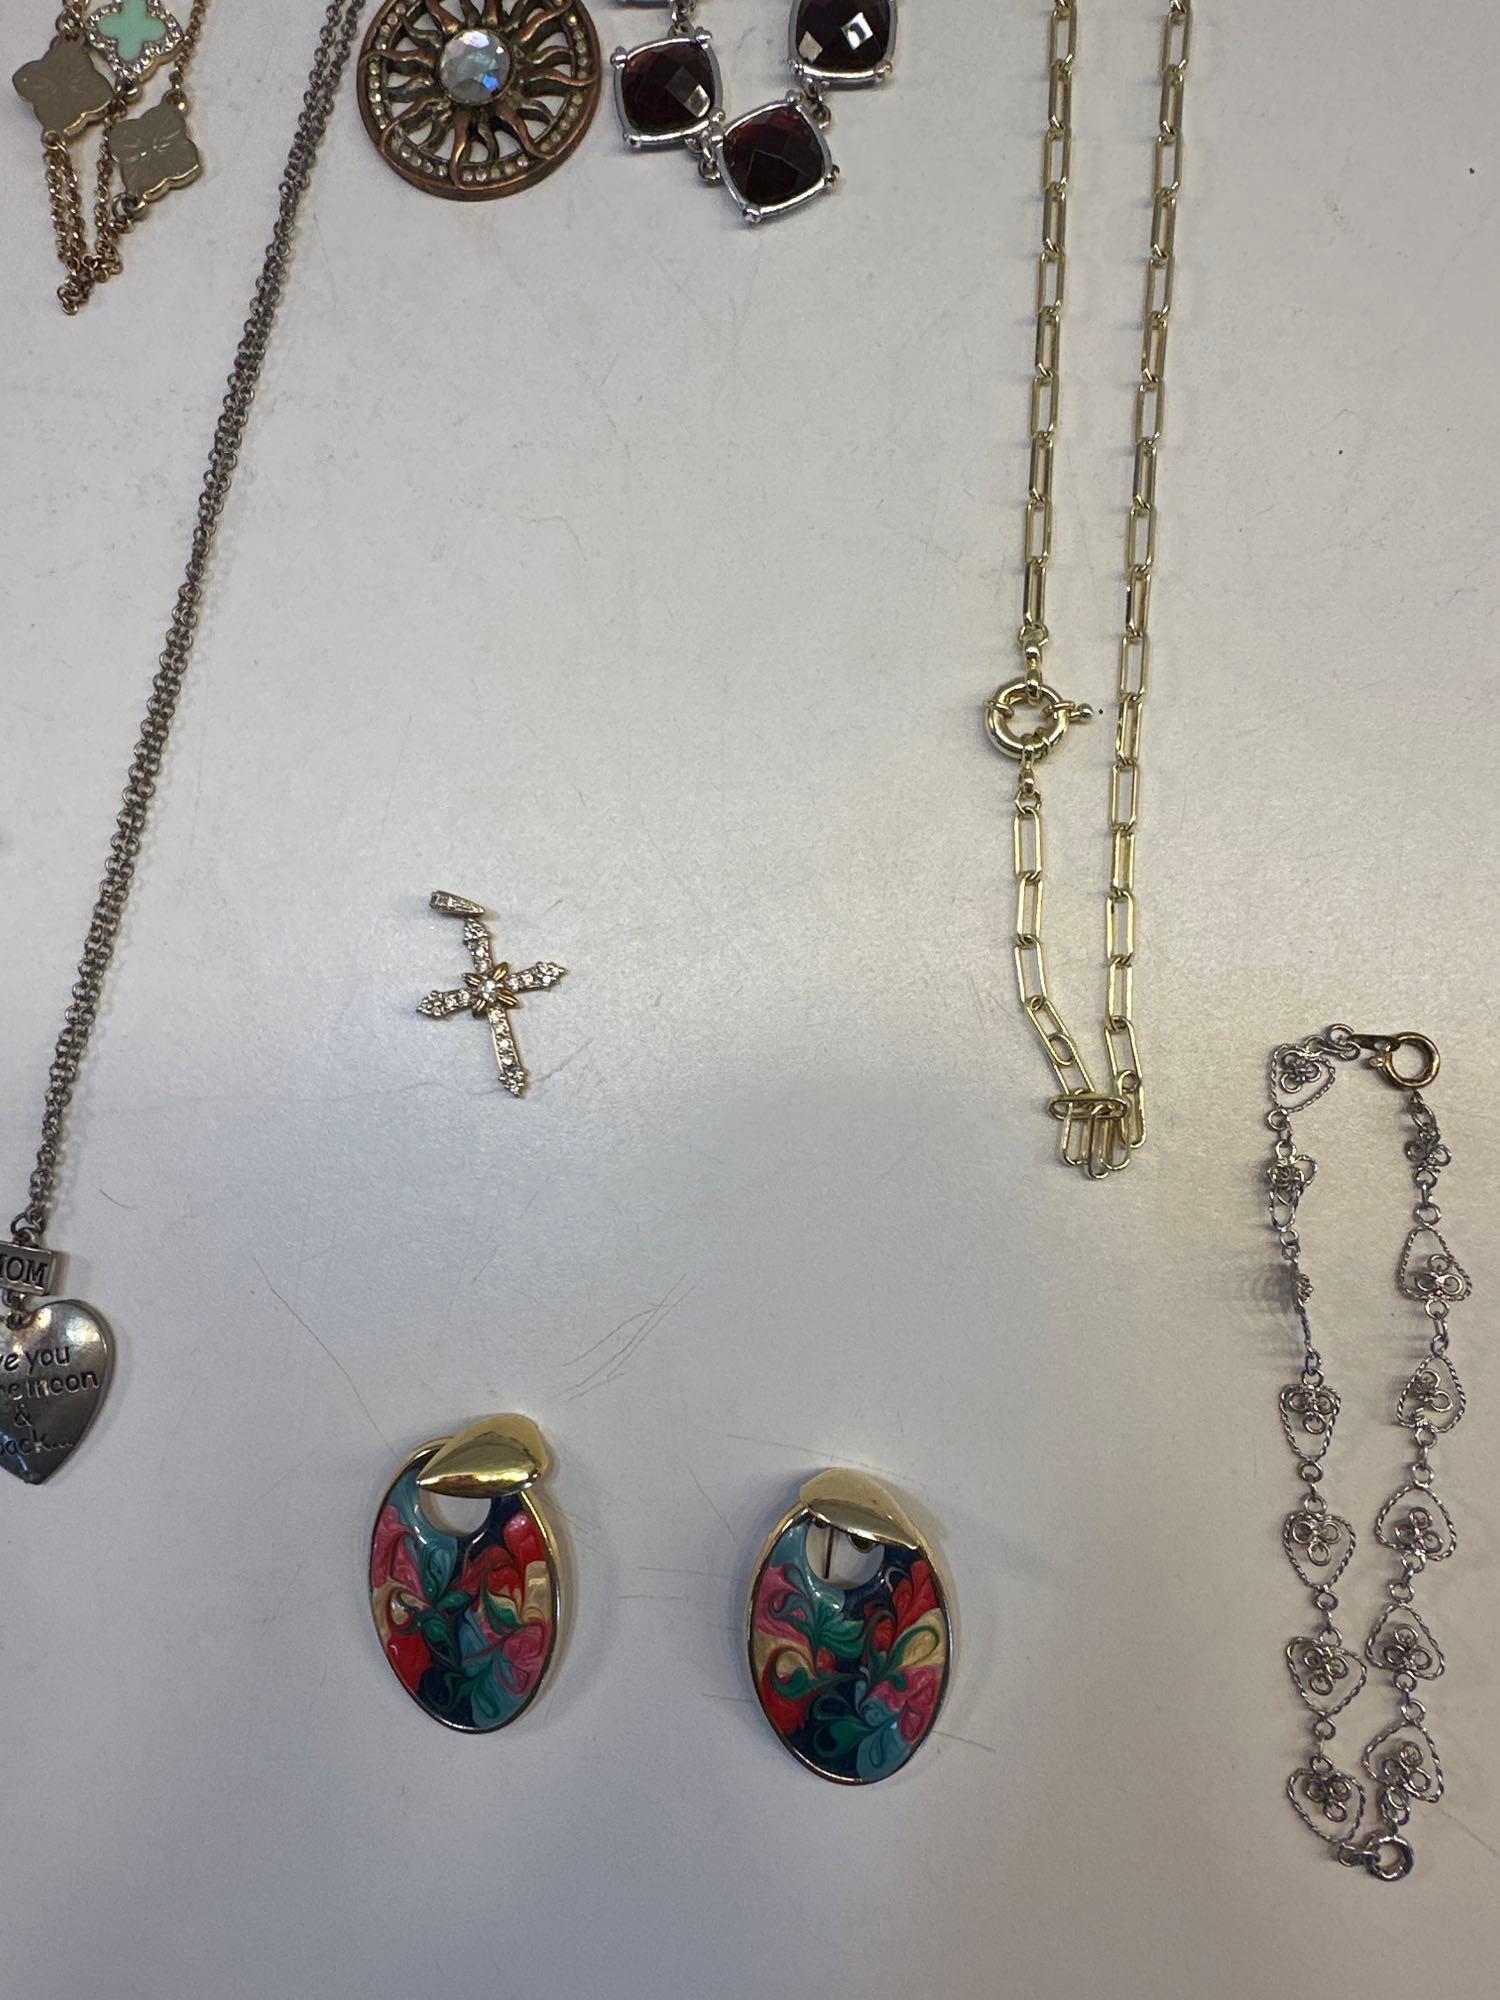 Costume Jewelry Lot, Rings, Necklaces, Earrings